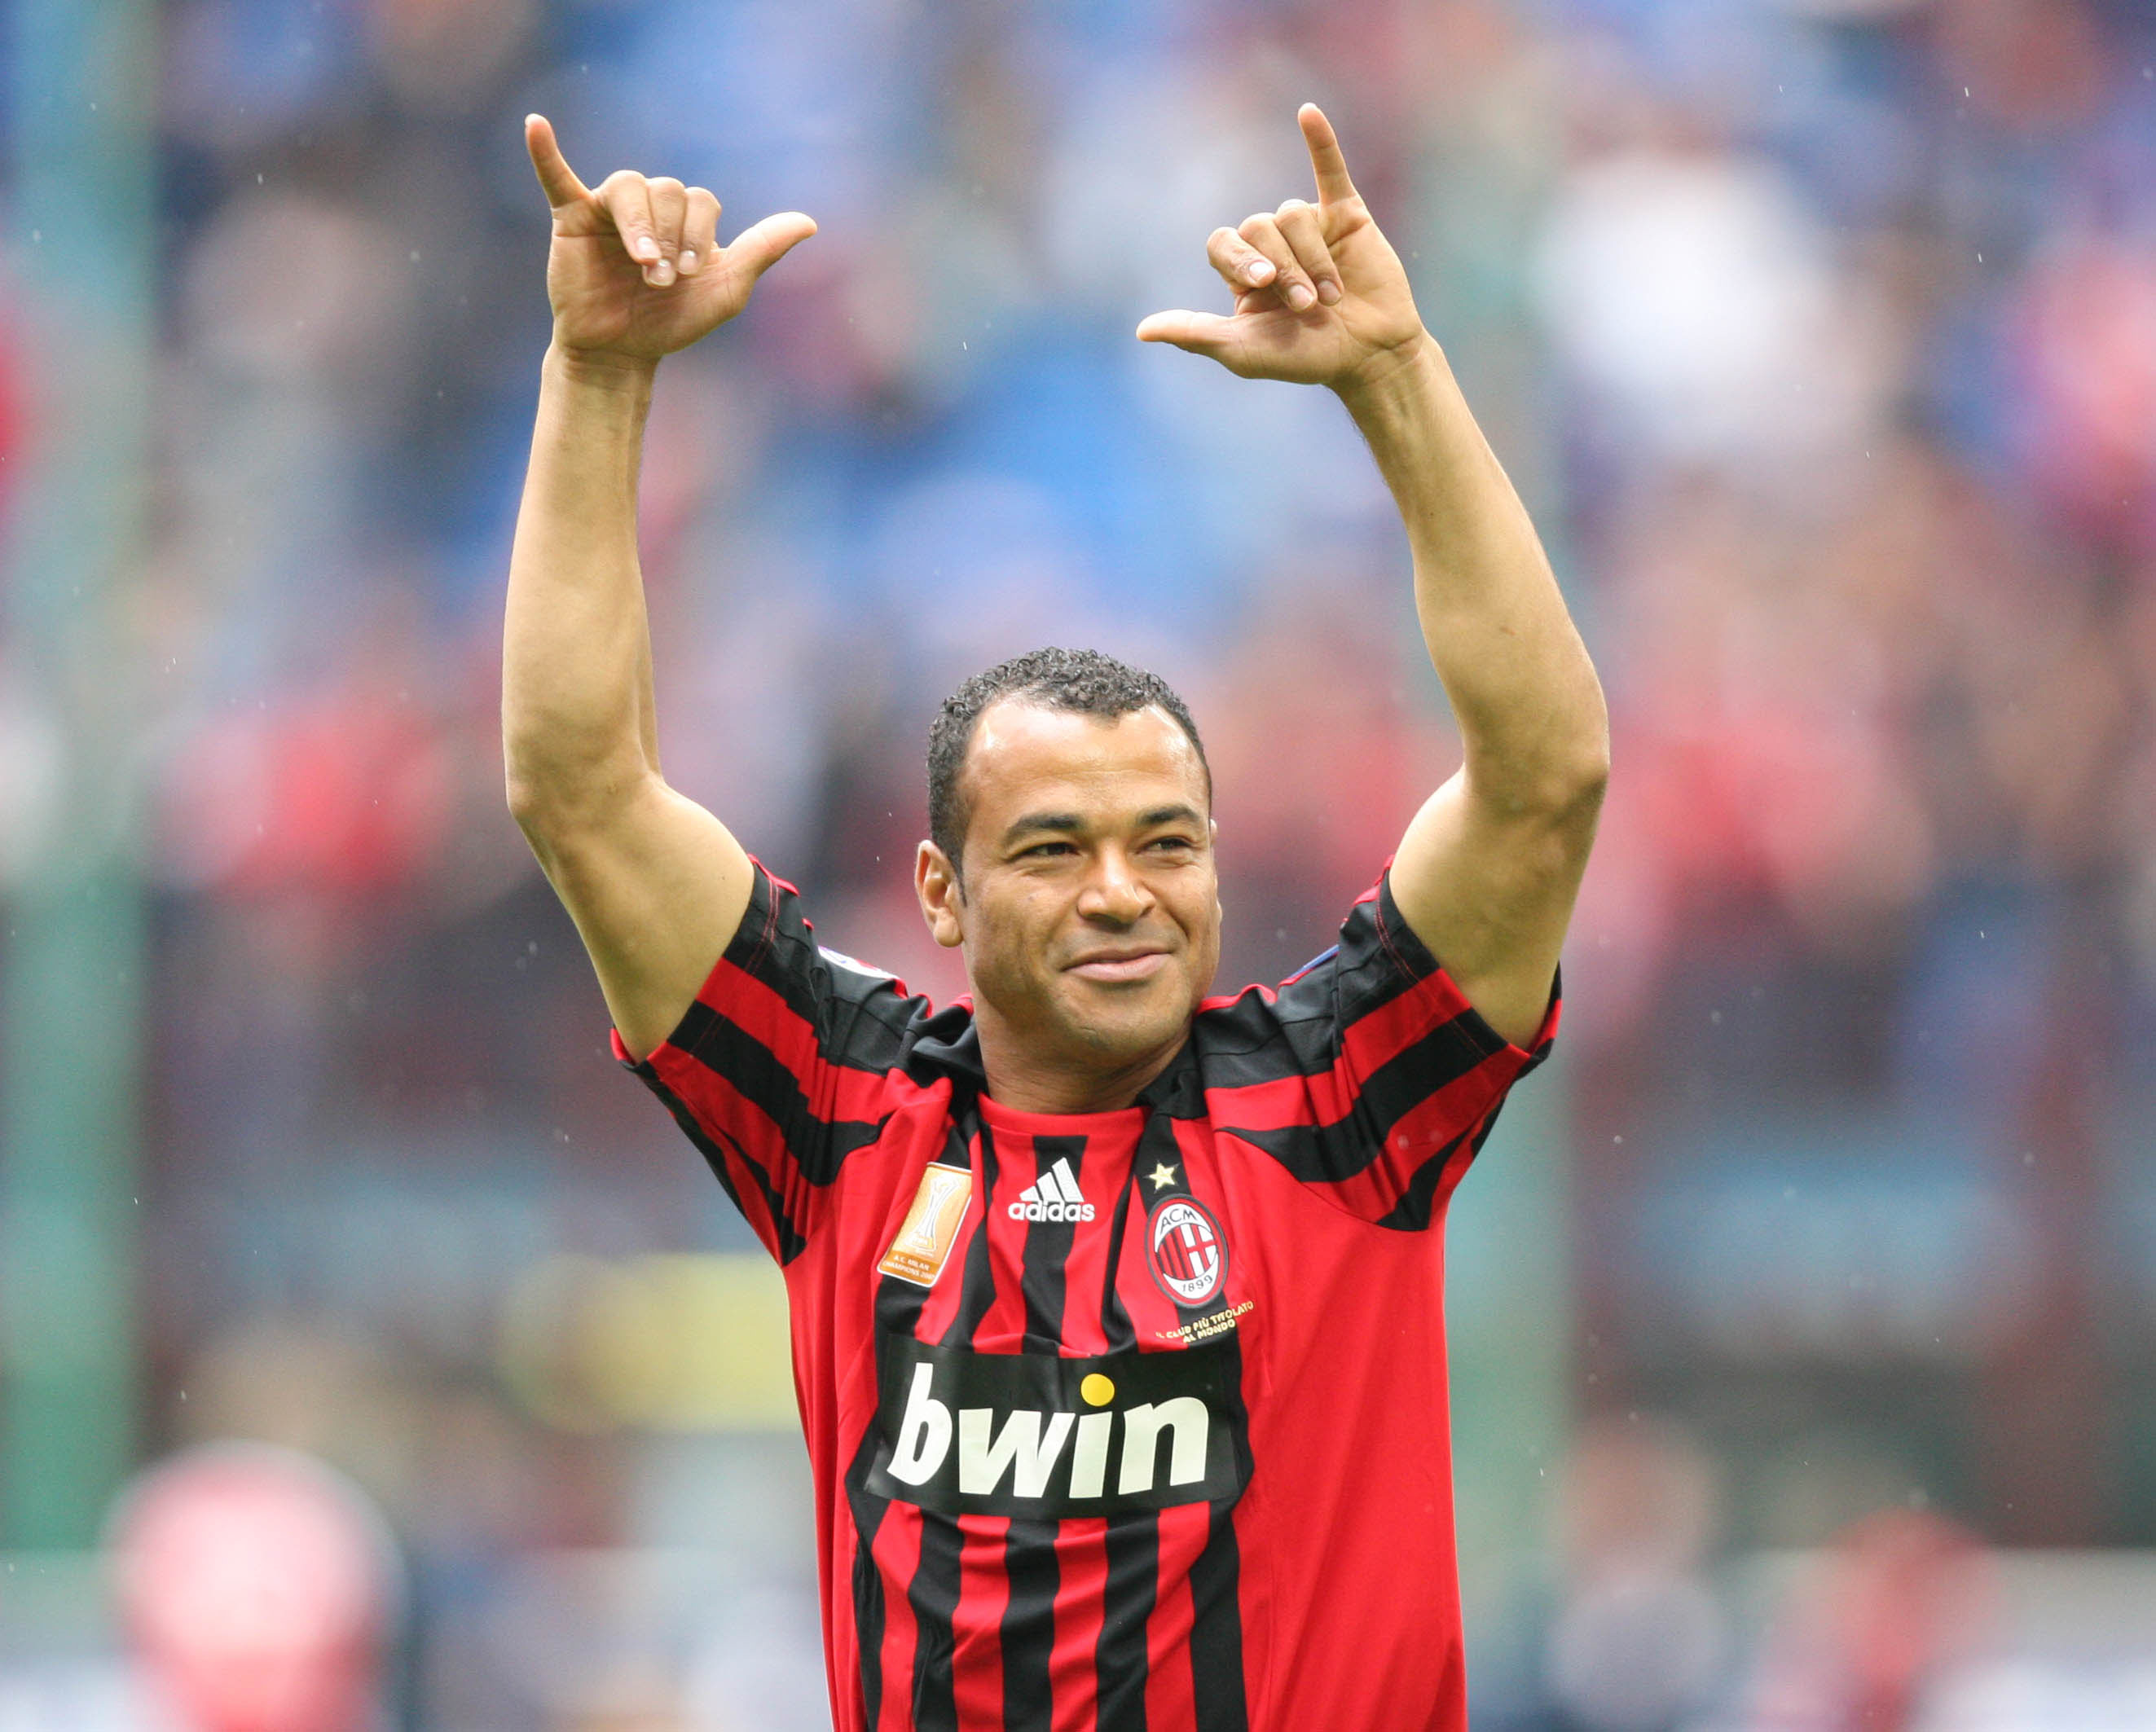 MILAN, ITALY - MAY 18:  Cafu of AC Milan celebrates a goal during the Serie A match between Milan and Udinese at the Stadio Meazza San Siro on May 18, 2008 in Milan, Italy. (Photo by New Press/Getty Images)